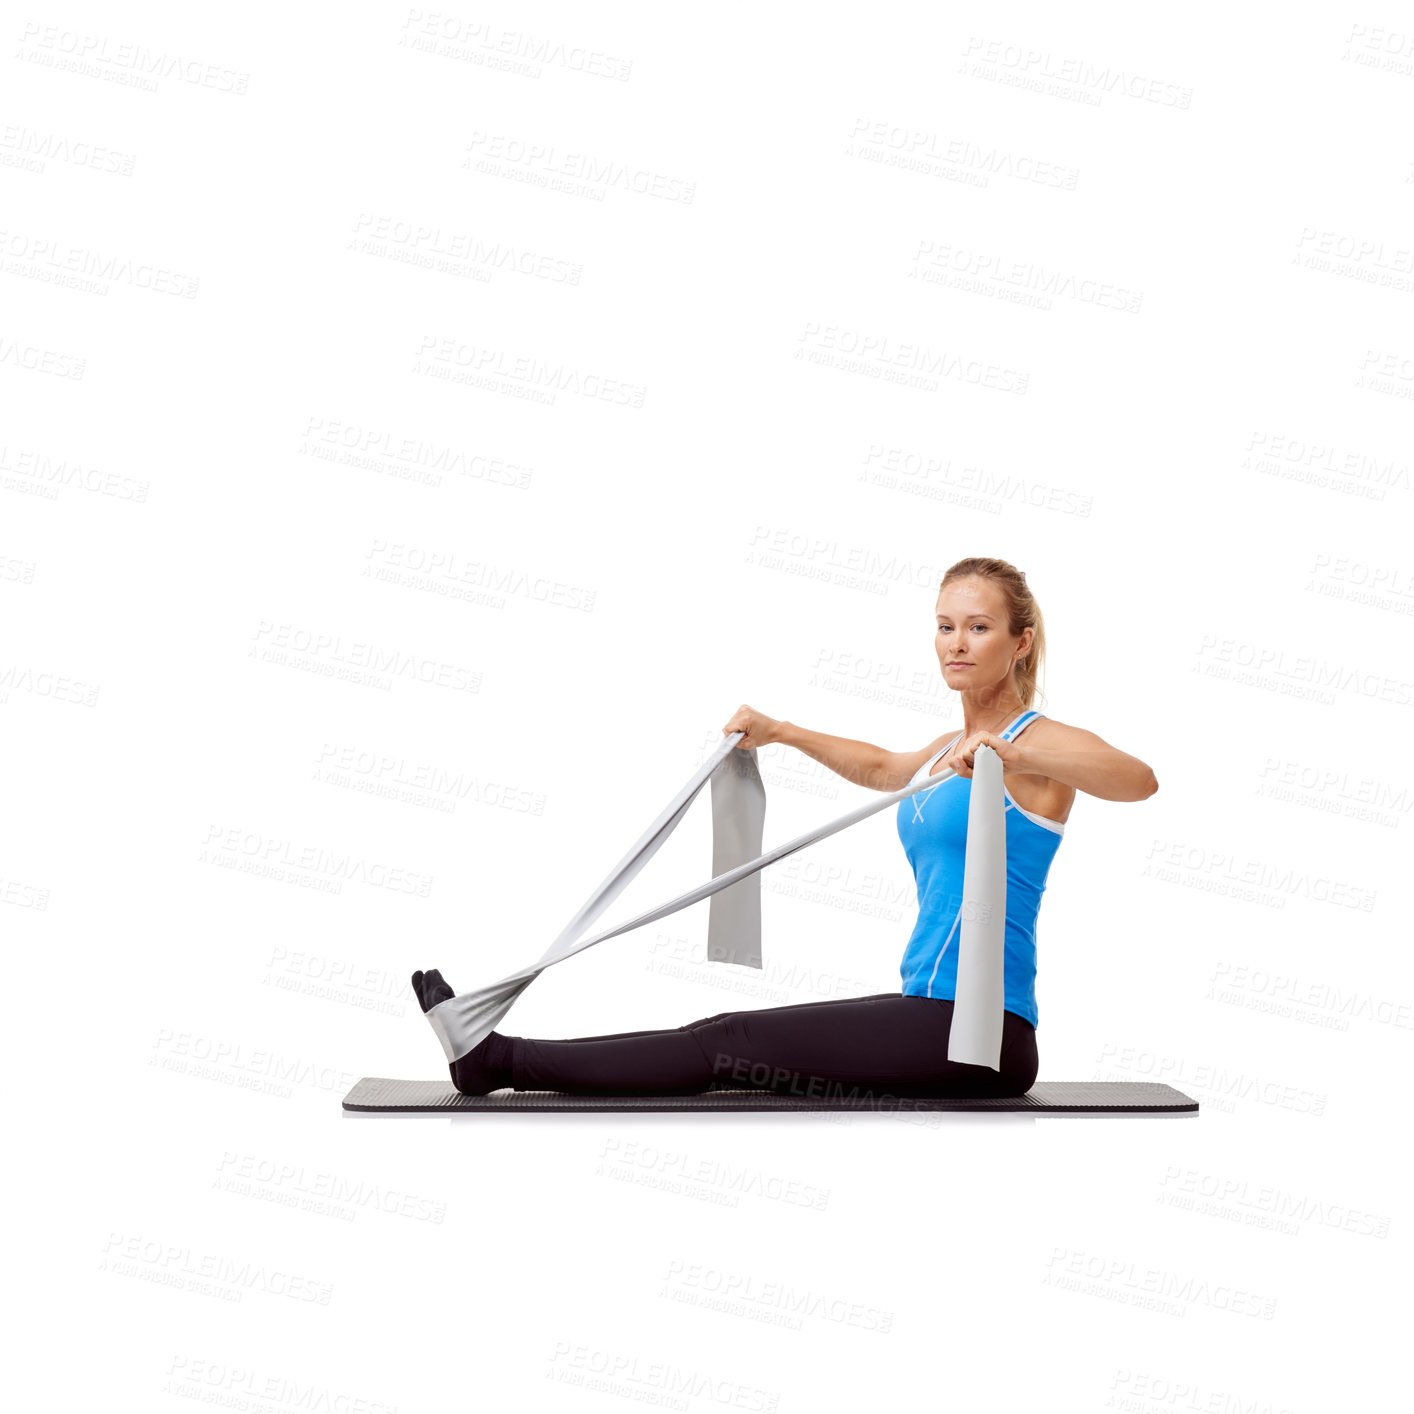 Buy stock photo Fitness, resistance band and portrait of woman doing exercise in studio for health, wellness and bodycare. Sport, yoga mat and person from Canada with arm workout or training by white background.